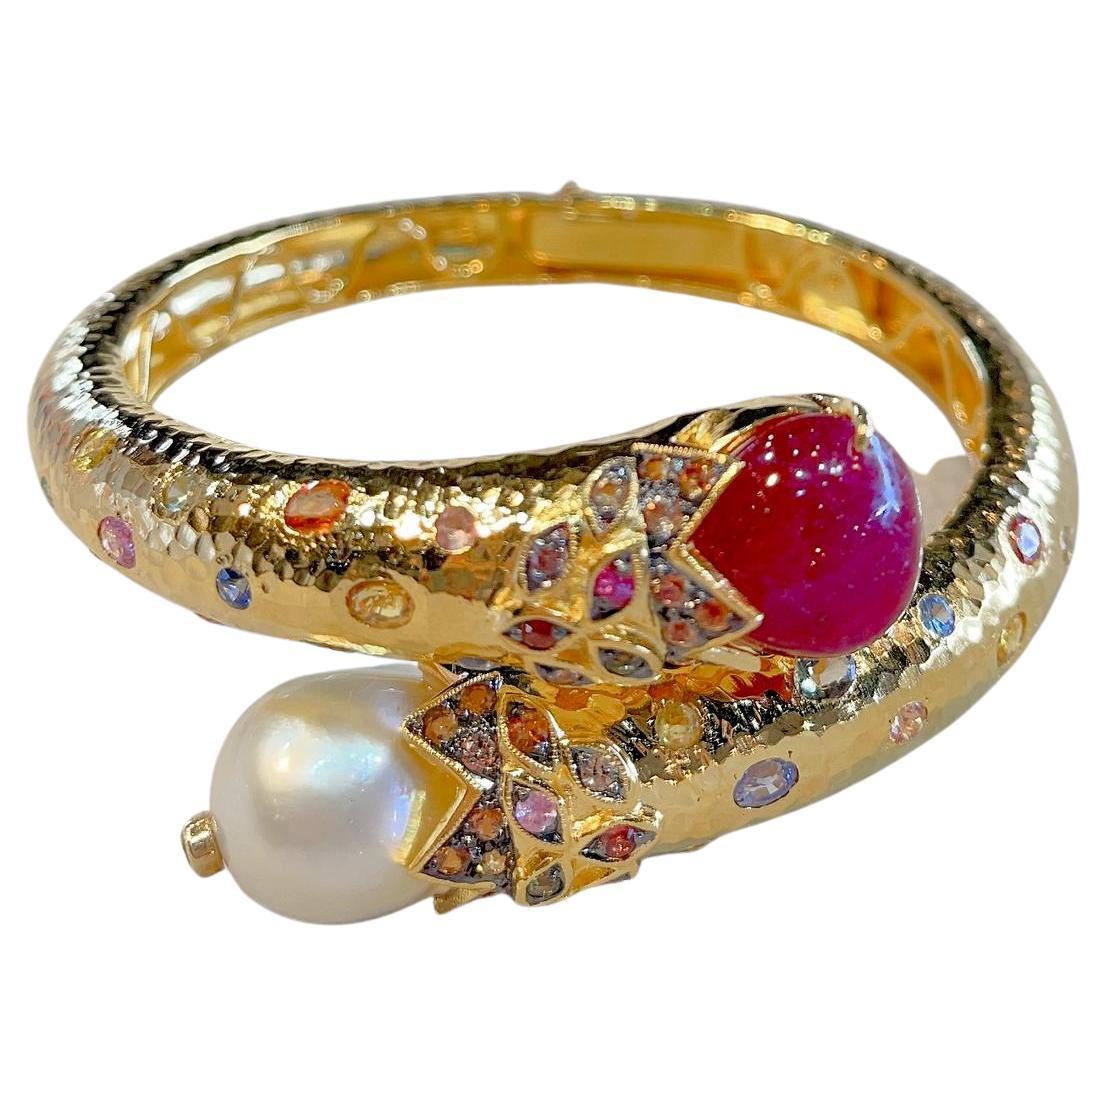 Bochic “Orient” Bangle, Ruby 
Fancy Sapphire & South Sea Pearl set in 22 Gold & Silver 
Natural Red Cabochon - 14 carats in total
Baroque white south sea natural cultured pearls
White color, with pink and silver tones 
Fancy color sapphires 6.6